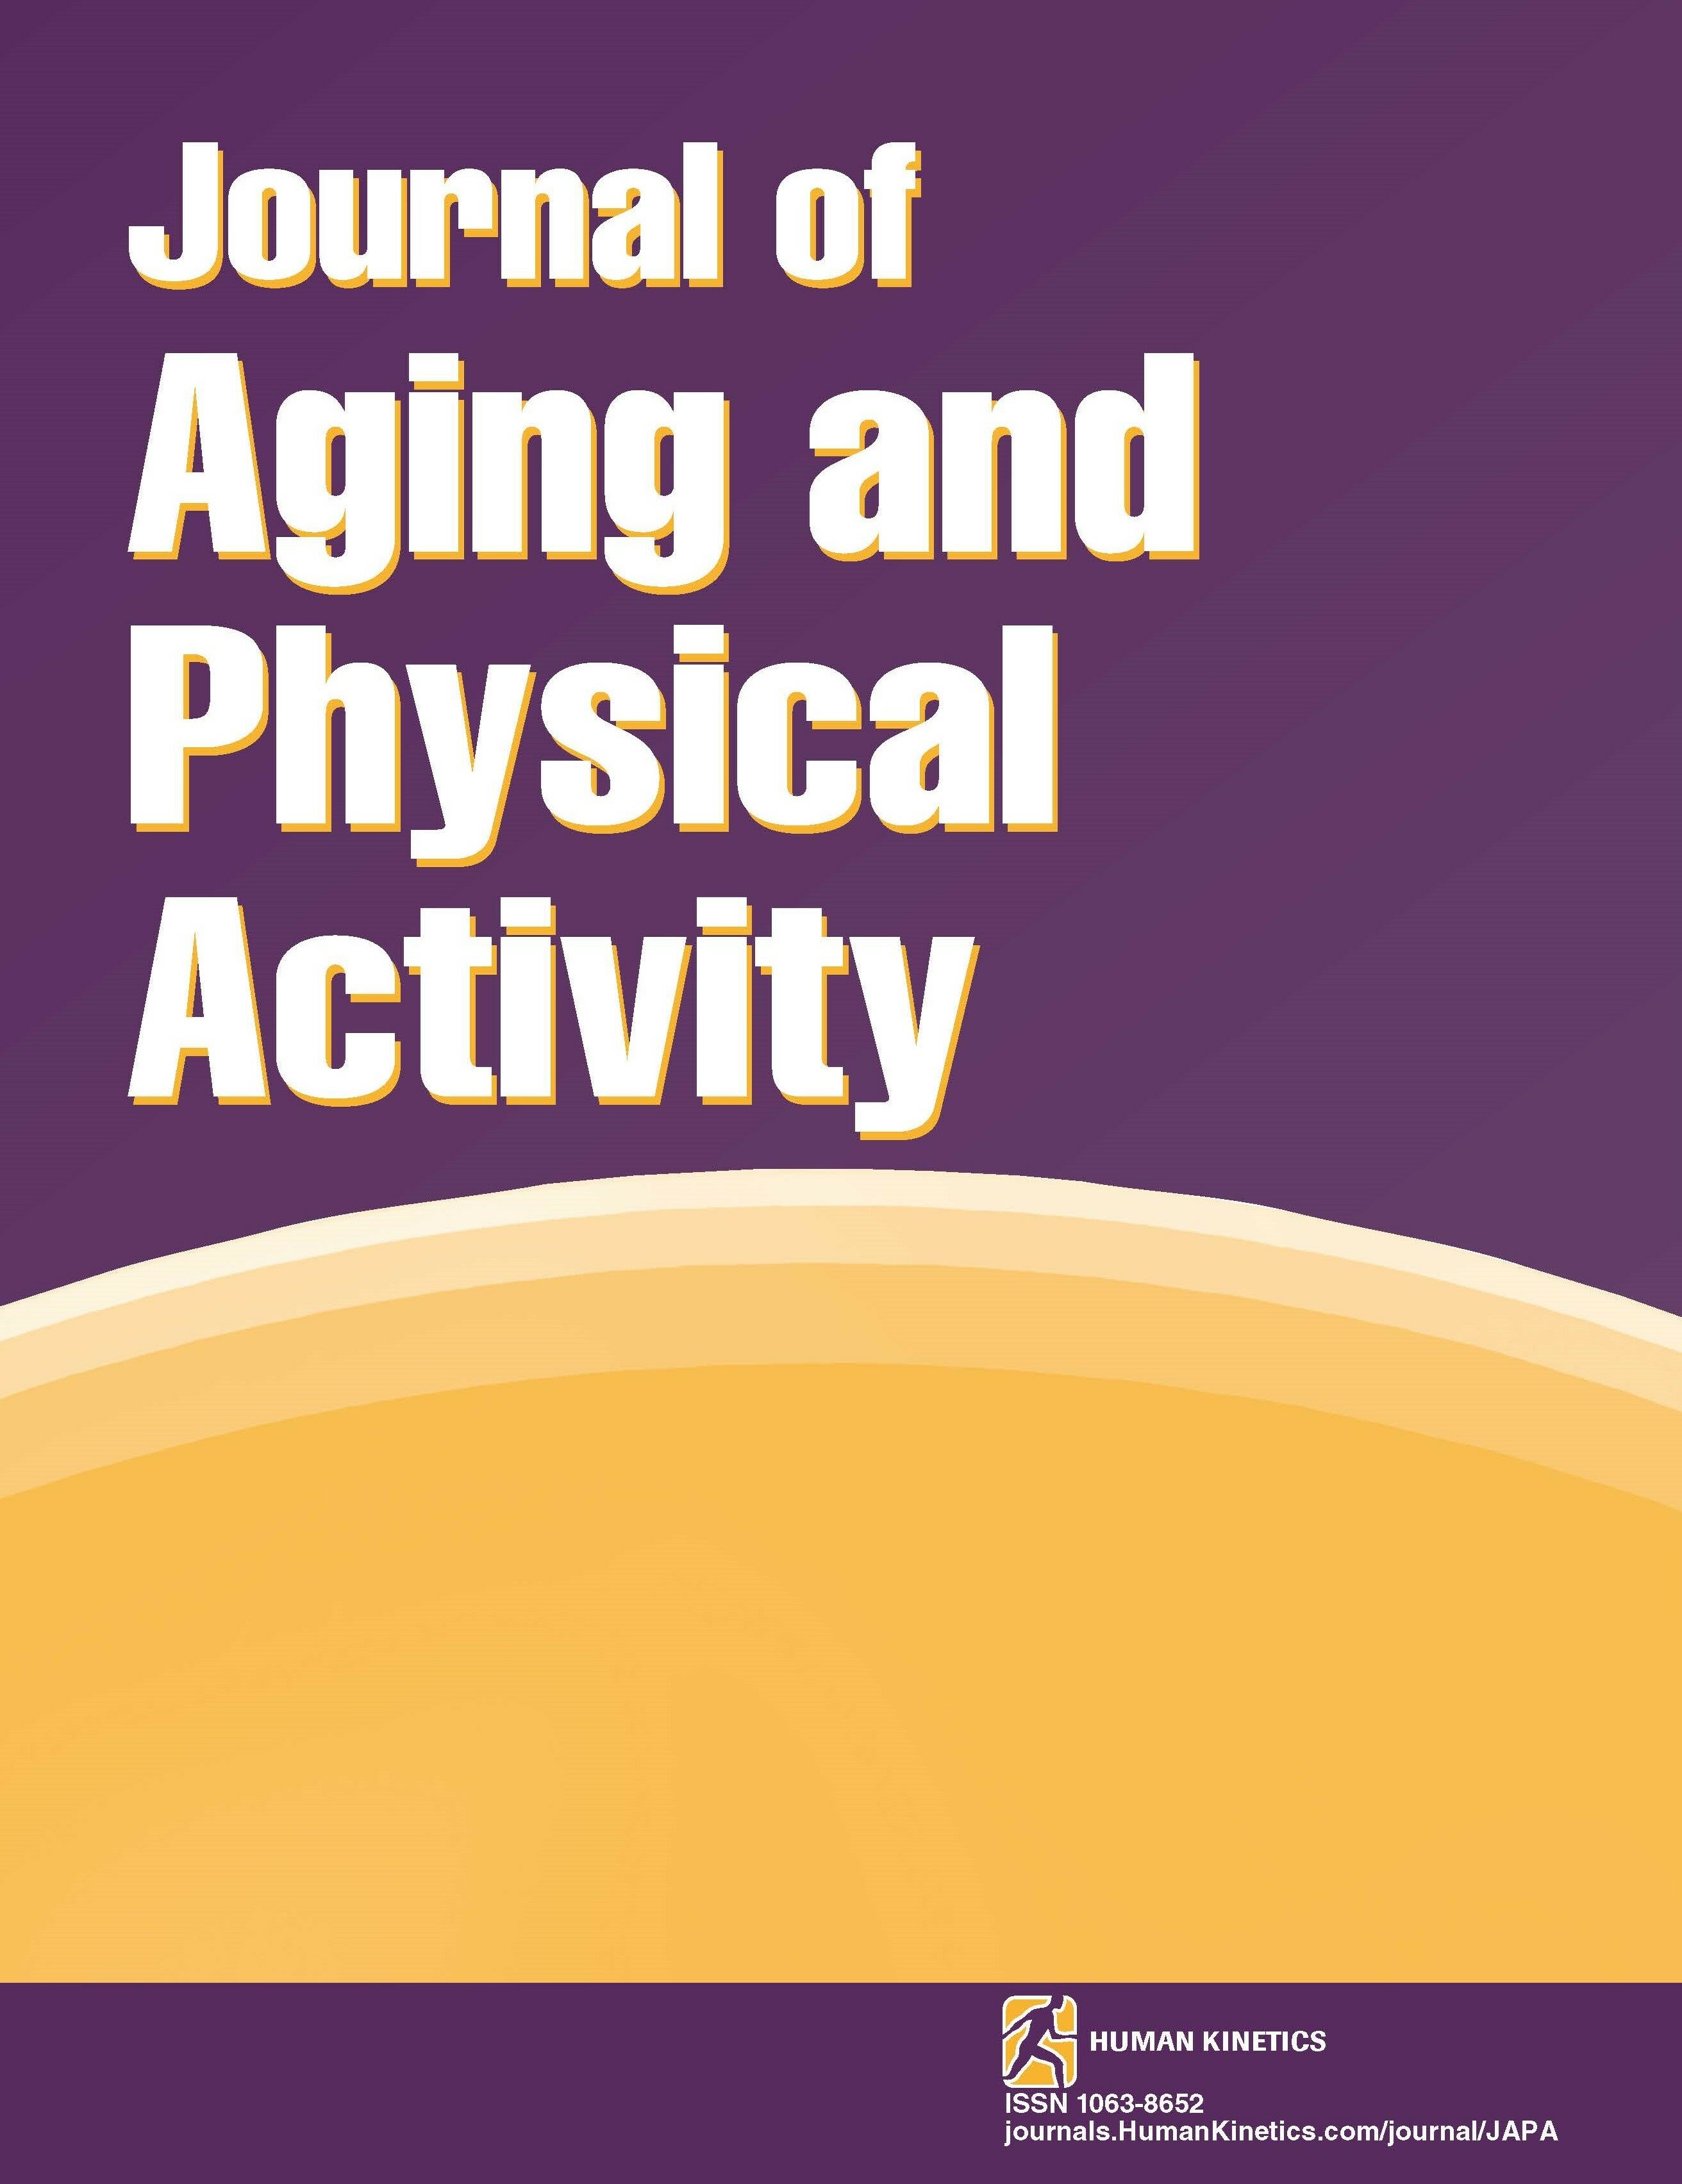 Predictors of Usual and Peak Gait Speed in Community-Dwelling Older Adults With Mild-to-Moderate Alzheimer’s Dementia